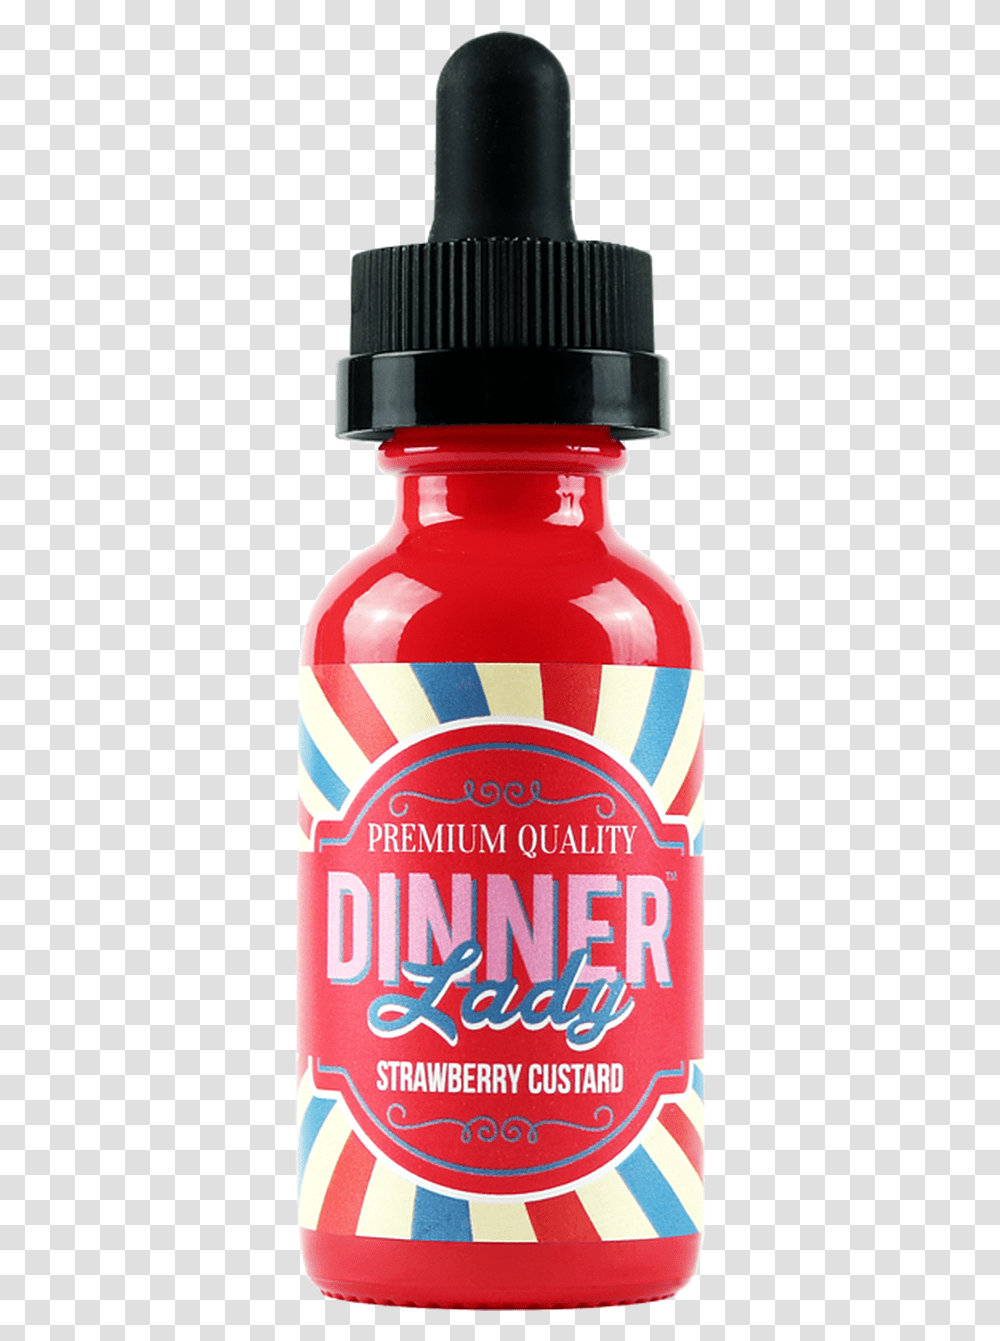 Strawberry Custard E Juice 60ml By Dinner Lady Dinner Lady Strawberry Macaron, Beverage, Drink, Alcohol, Bottle Transparent Png